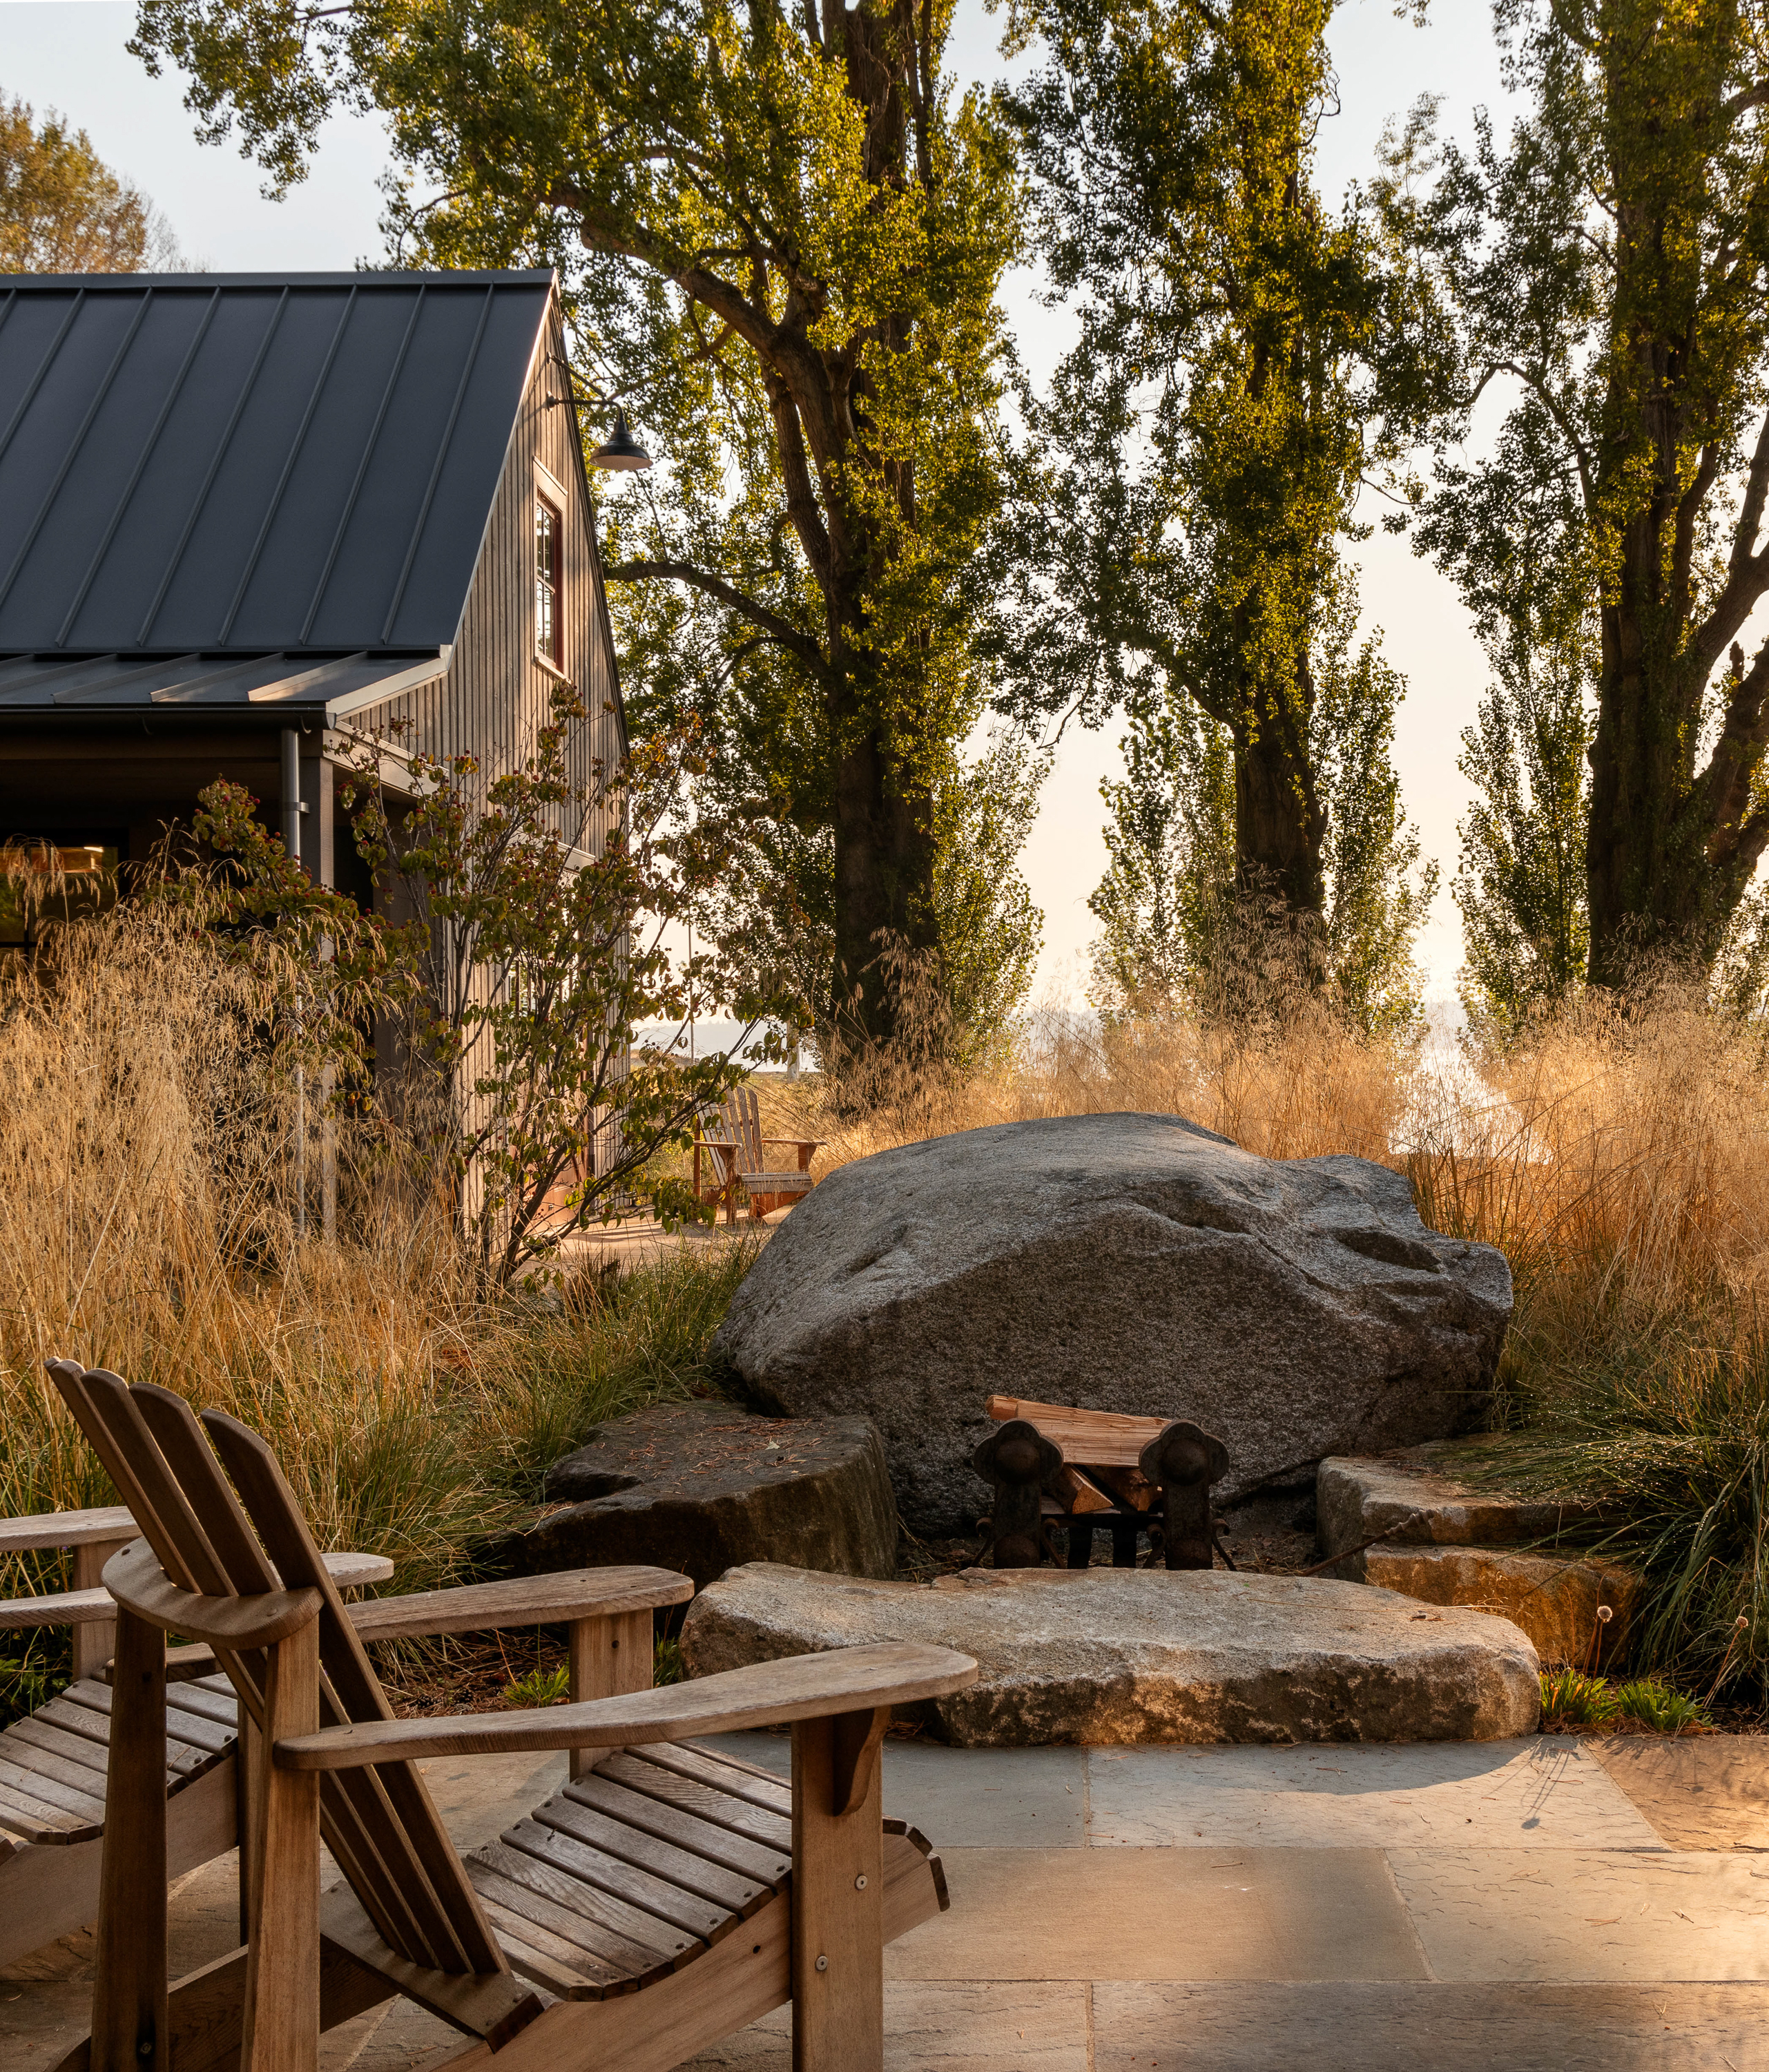 View of the fire pit on the patio, where large boulders have been thoughtfully incorporated to seamlessly blend with the natural landscape, creating a captivating outdoor space that harmonizes with the surroundings.